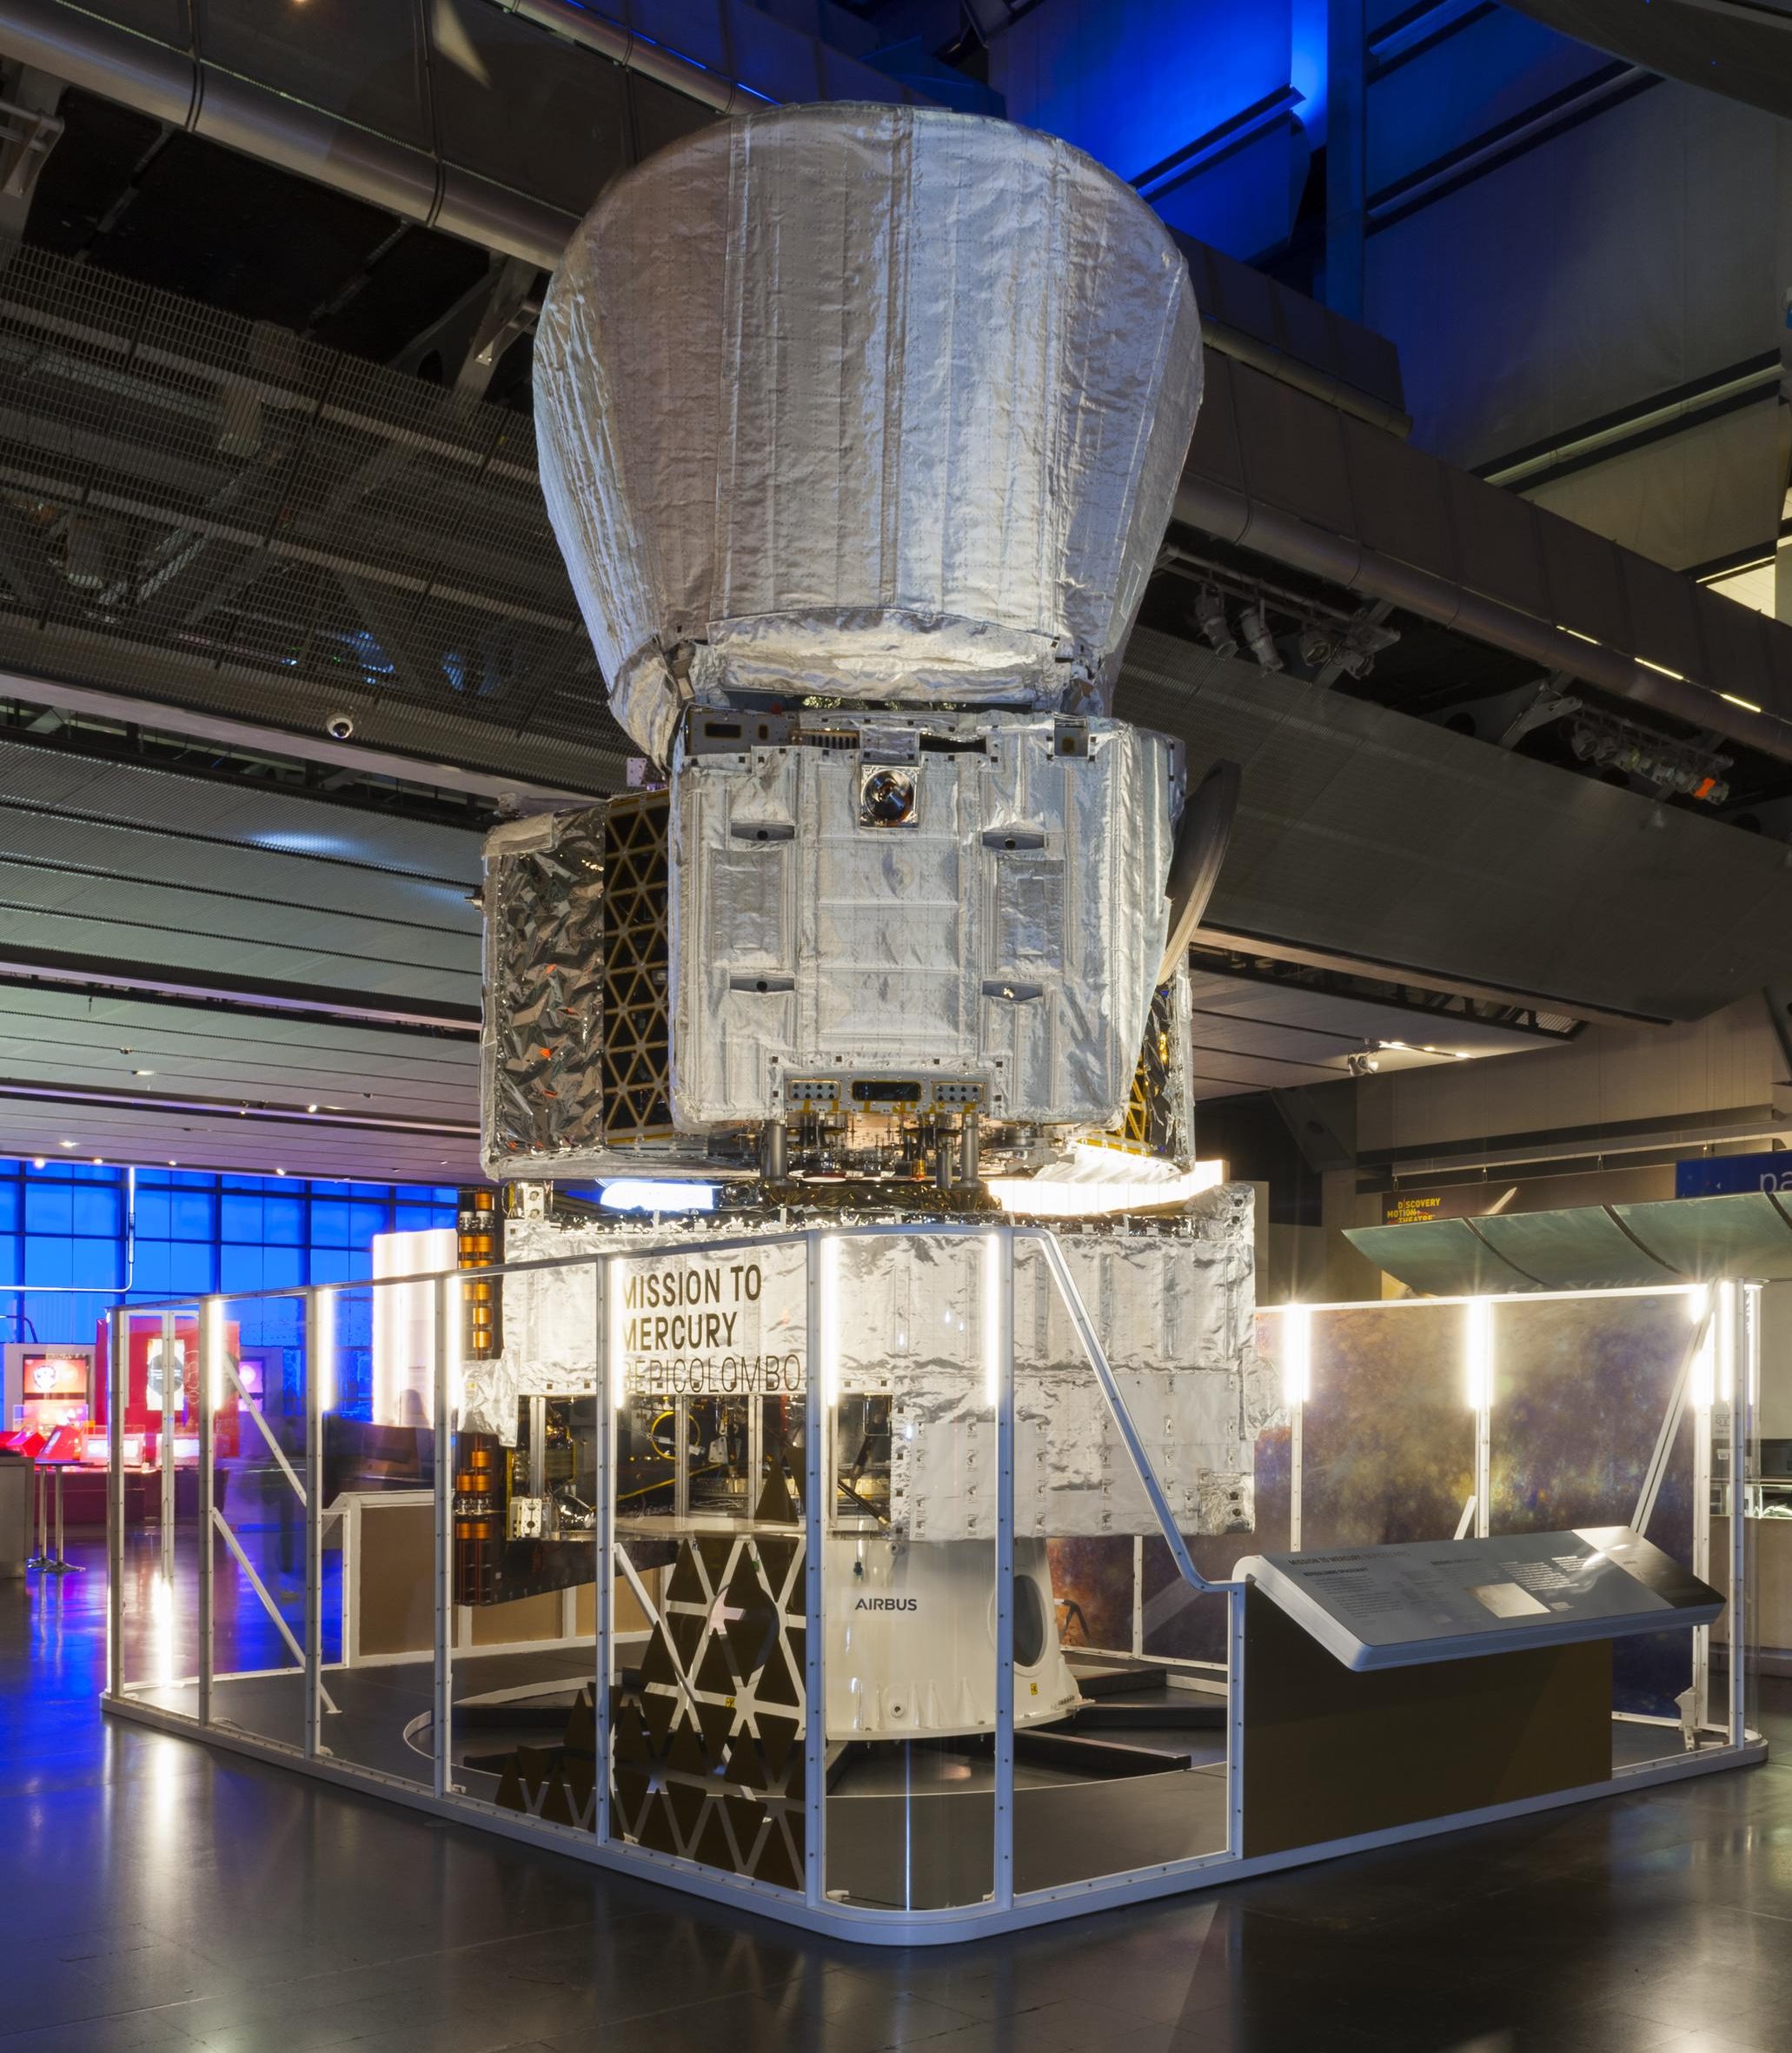 BepiColombo is the ESA's first spacecraft to Mercury. The full-size structural thermal model can be seen in the Tomorrow's World gallery of the Science Museum, London.